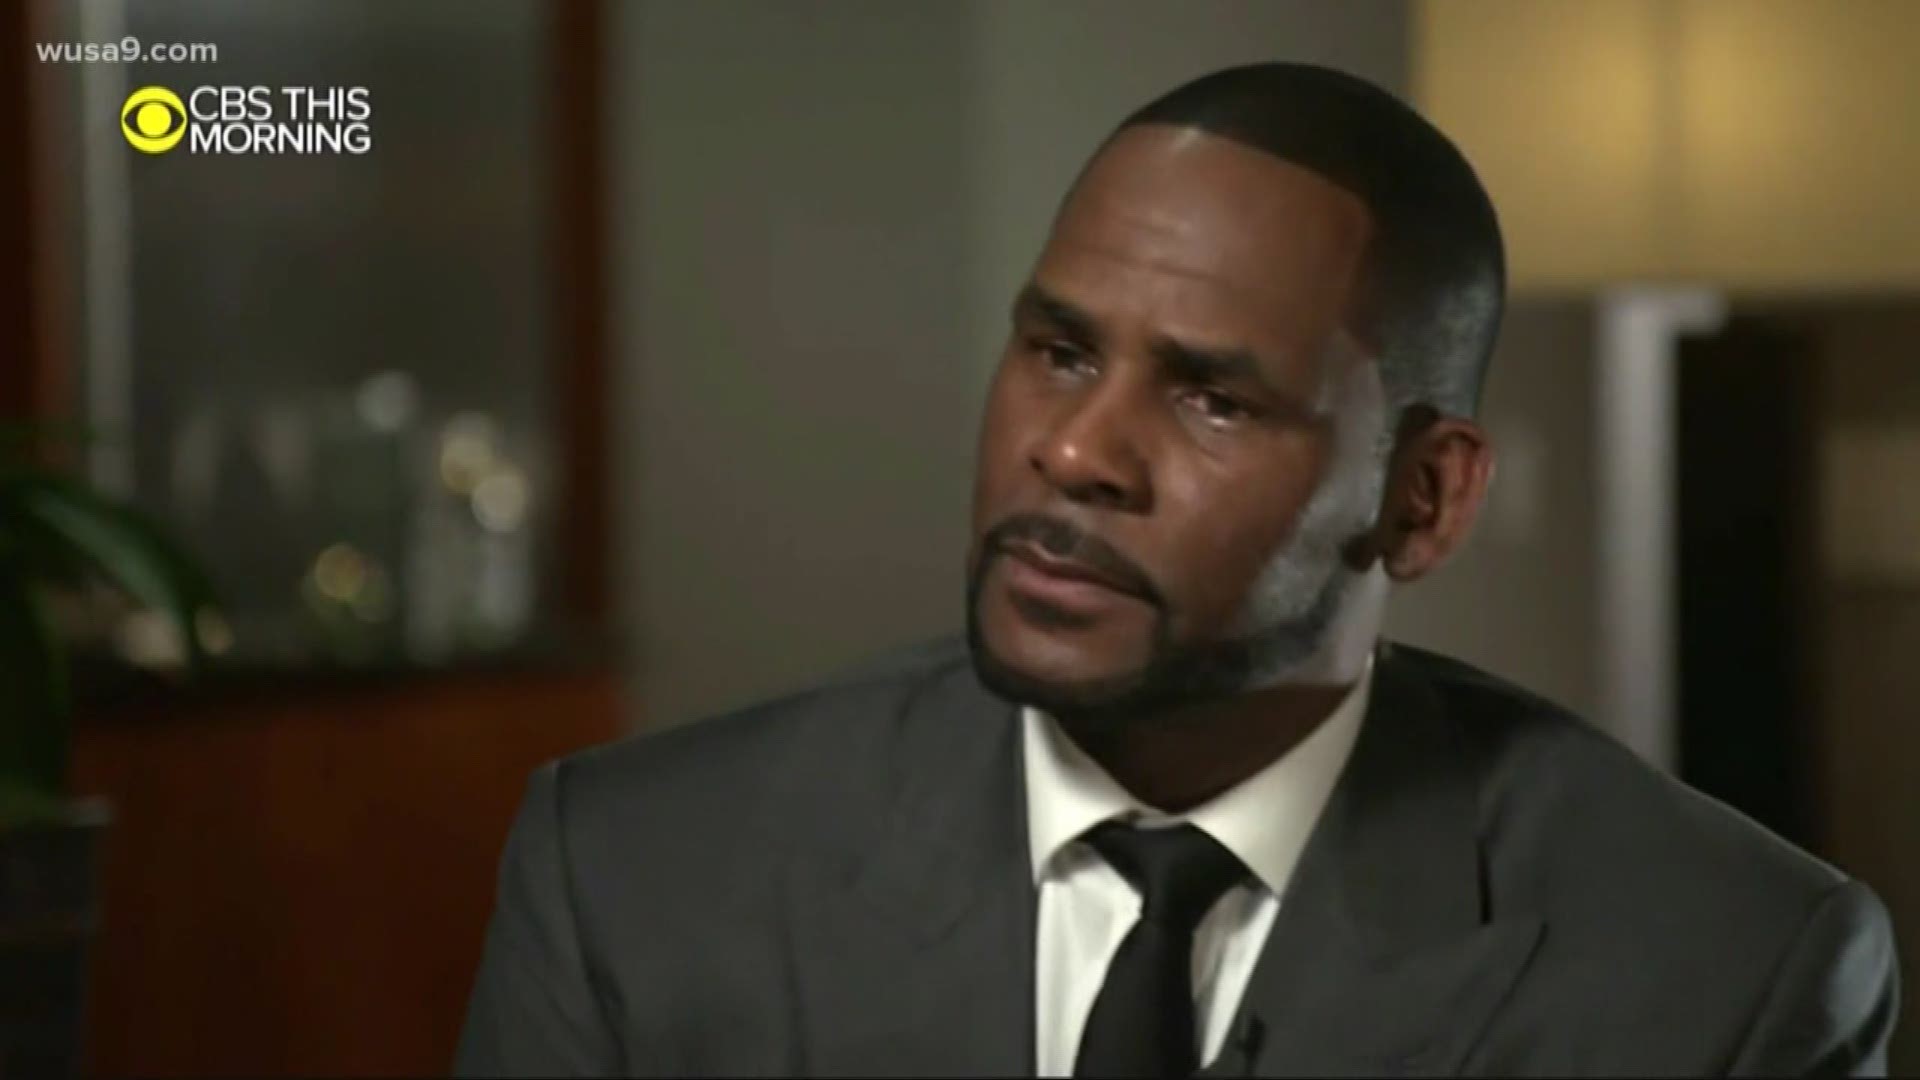 Psychologist Dr. Nicole Cutts and criminal defense attorney Robert Jenkins break down R. Kelly's explosive interview with Gayle King.